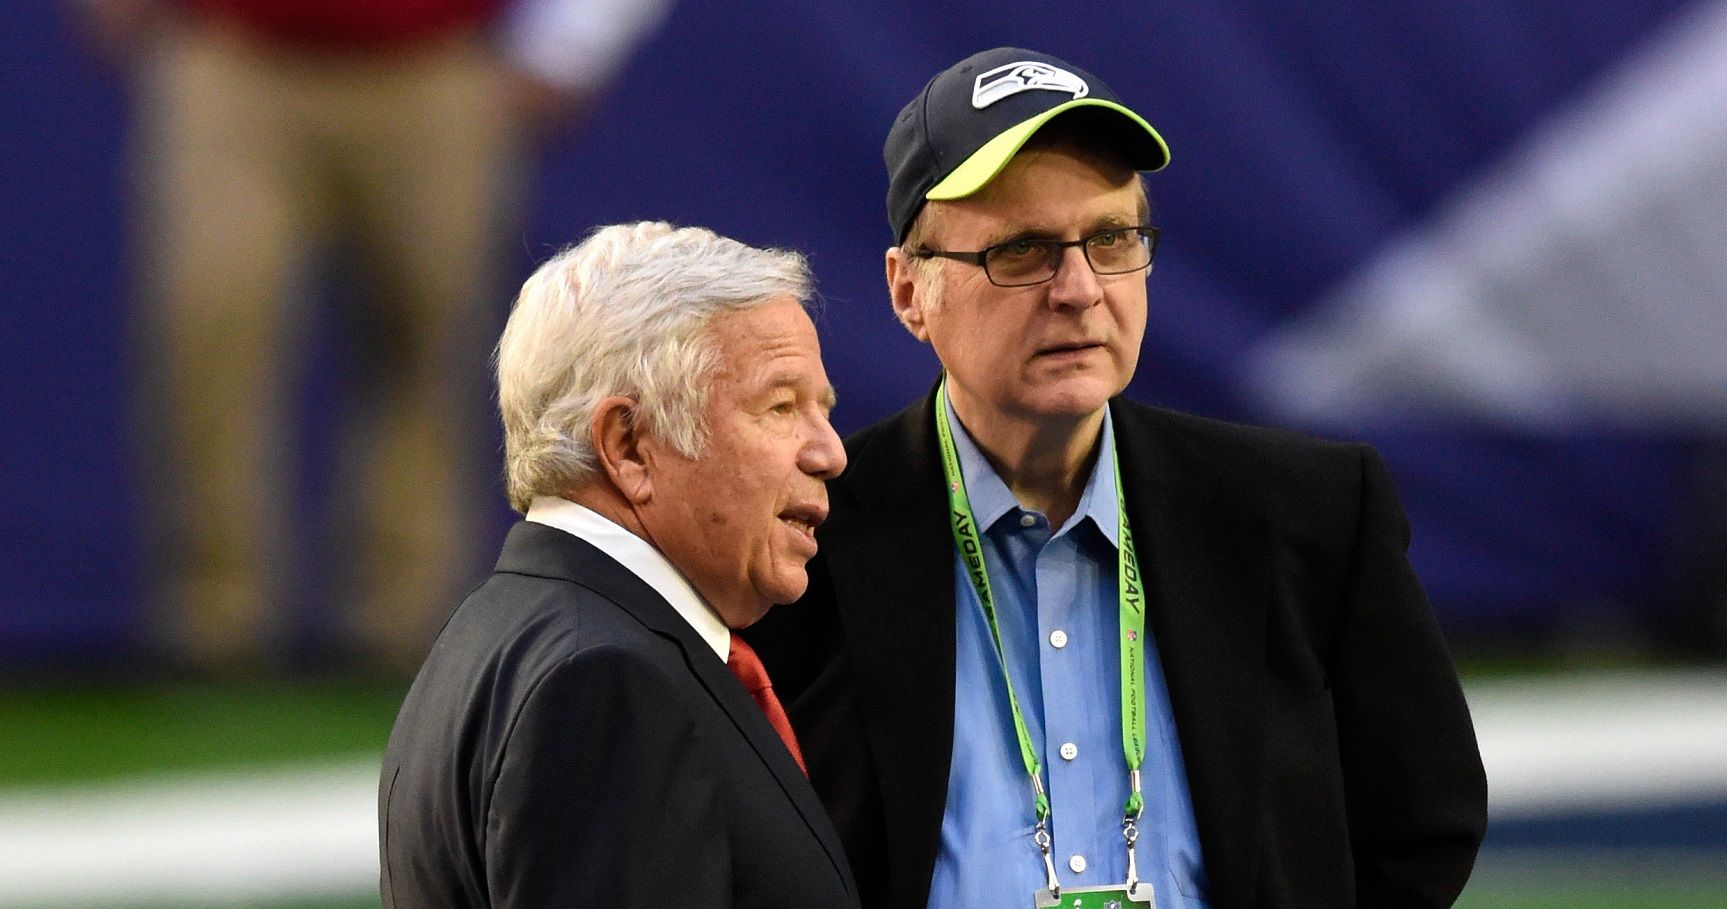 Top 10 Richest Nfl Owners In 2015 Therichest 